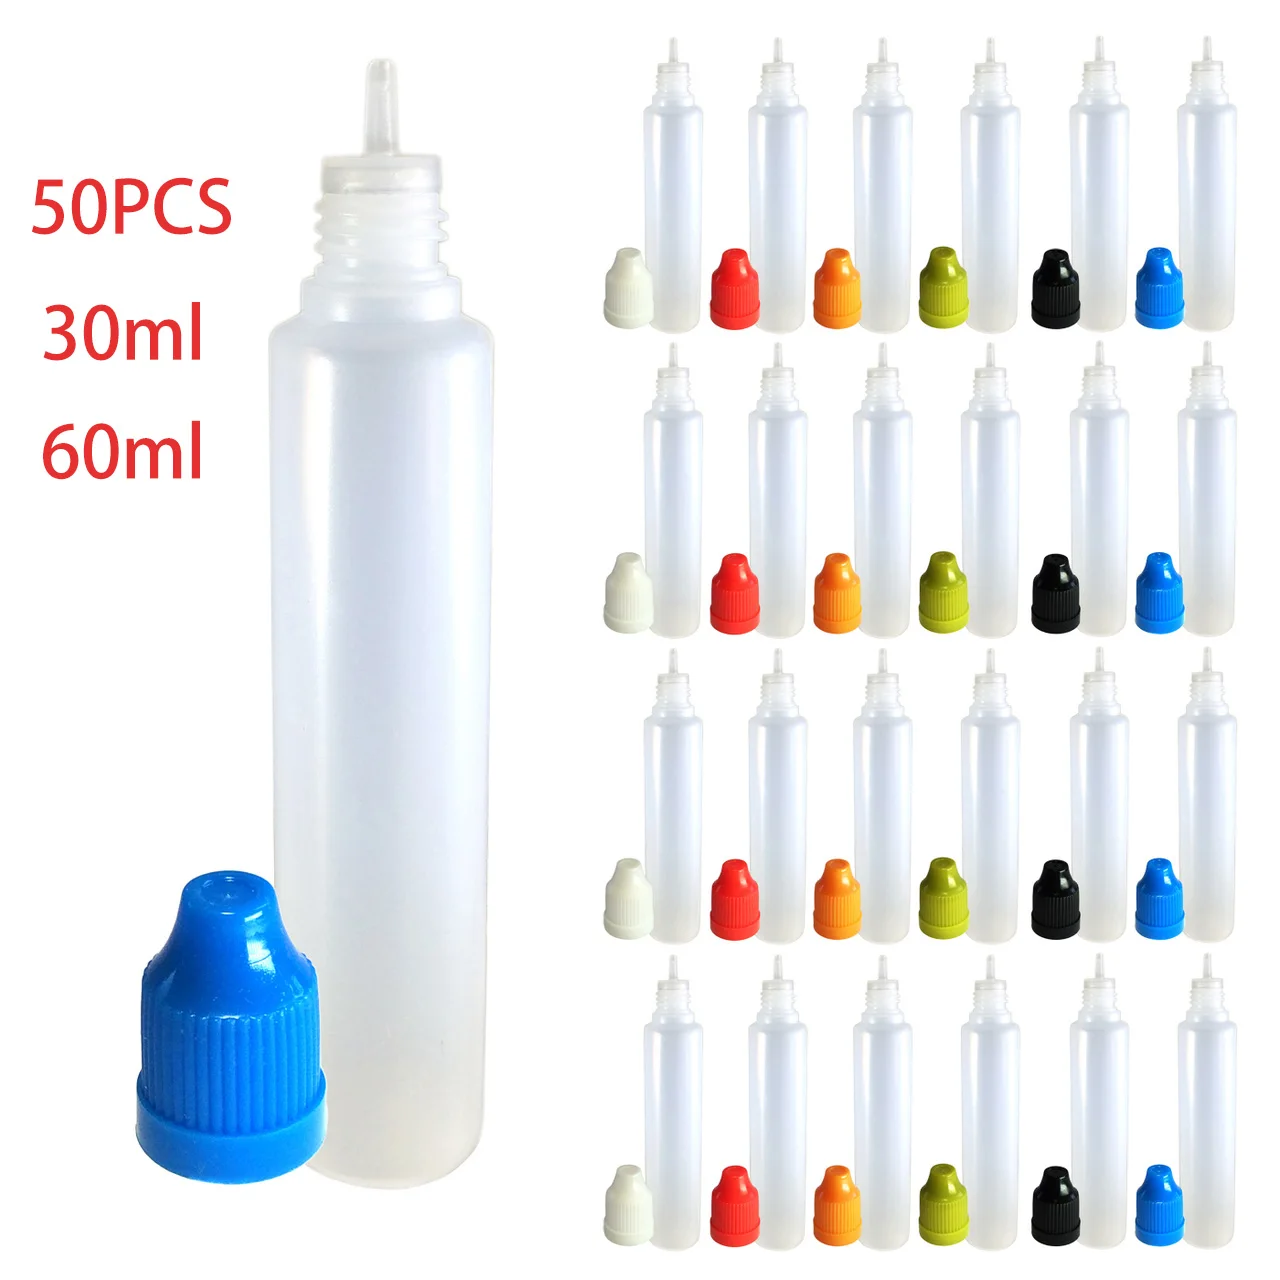 

50PCS 30ml 60ml LDPE Empty Dropper Bottles Squeezable Juice Eye Liquid Dropper Containers with CRC Caps Plug Tips Funnel